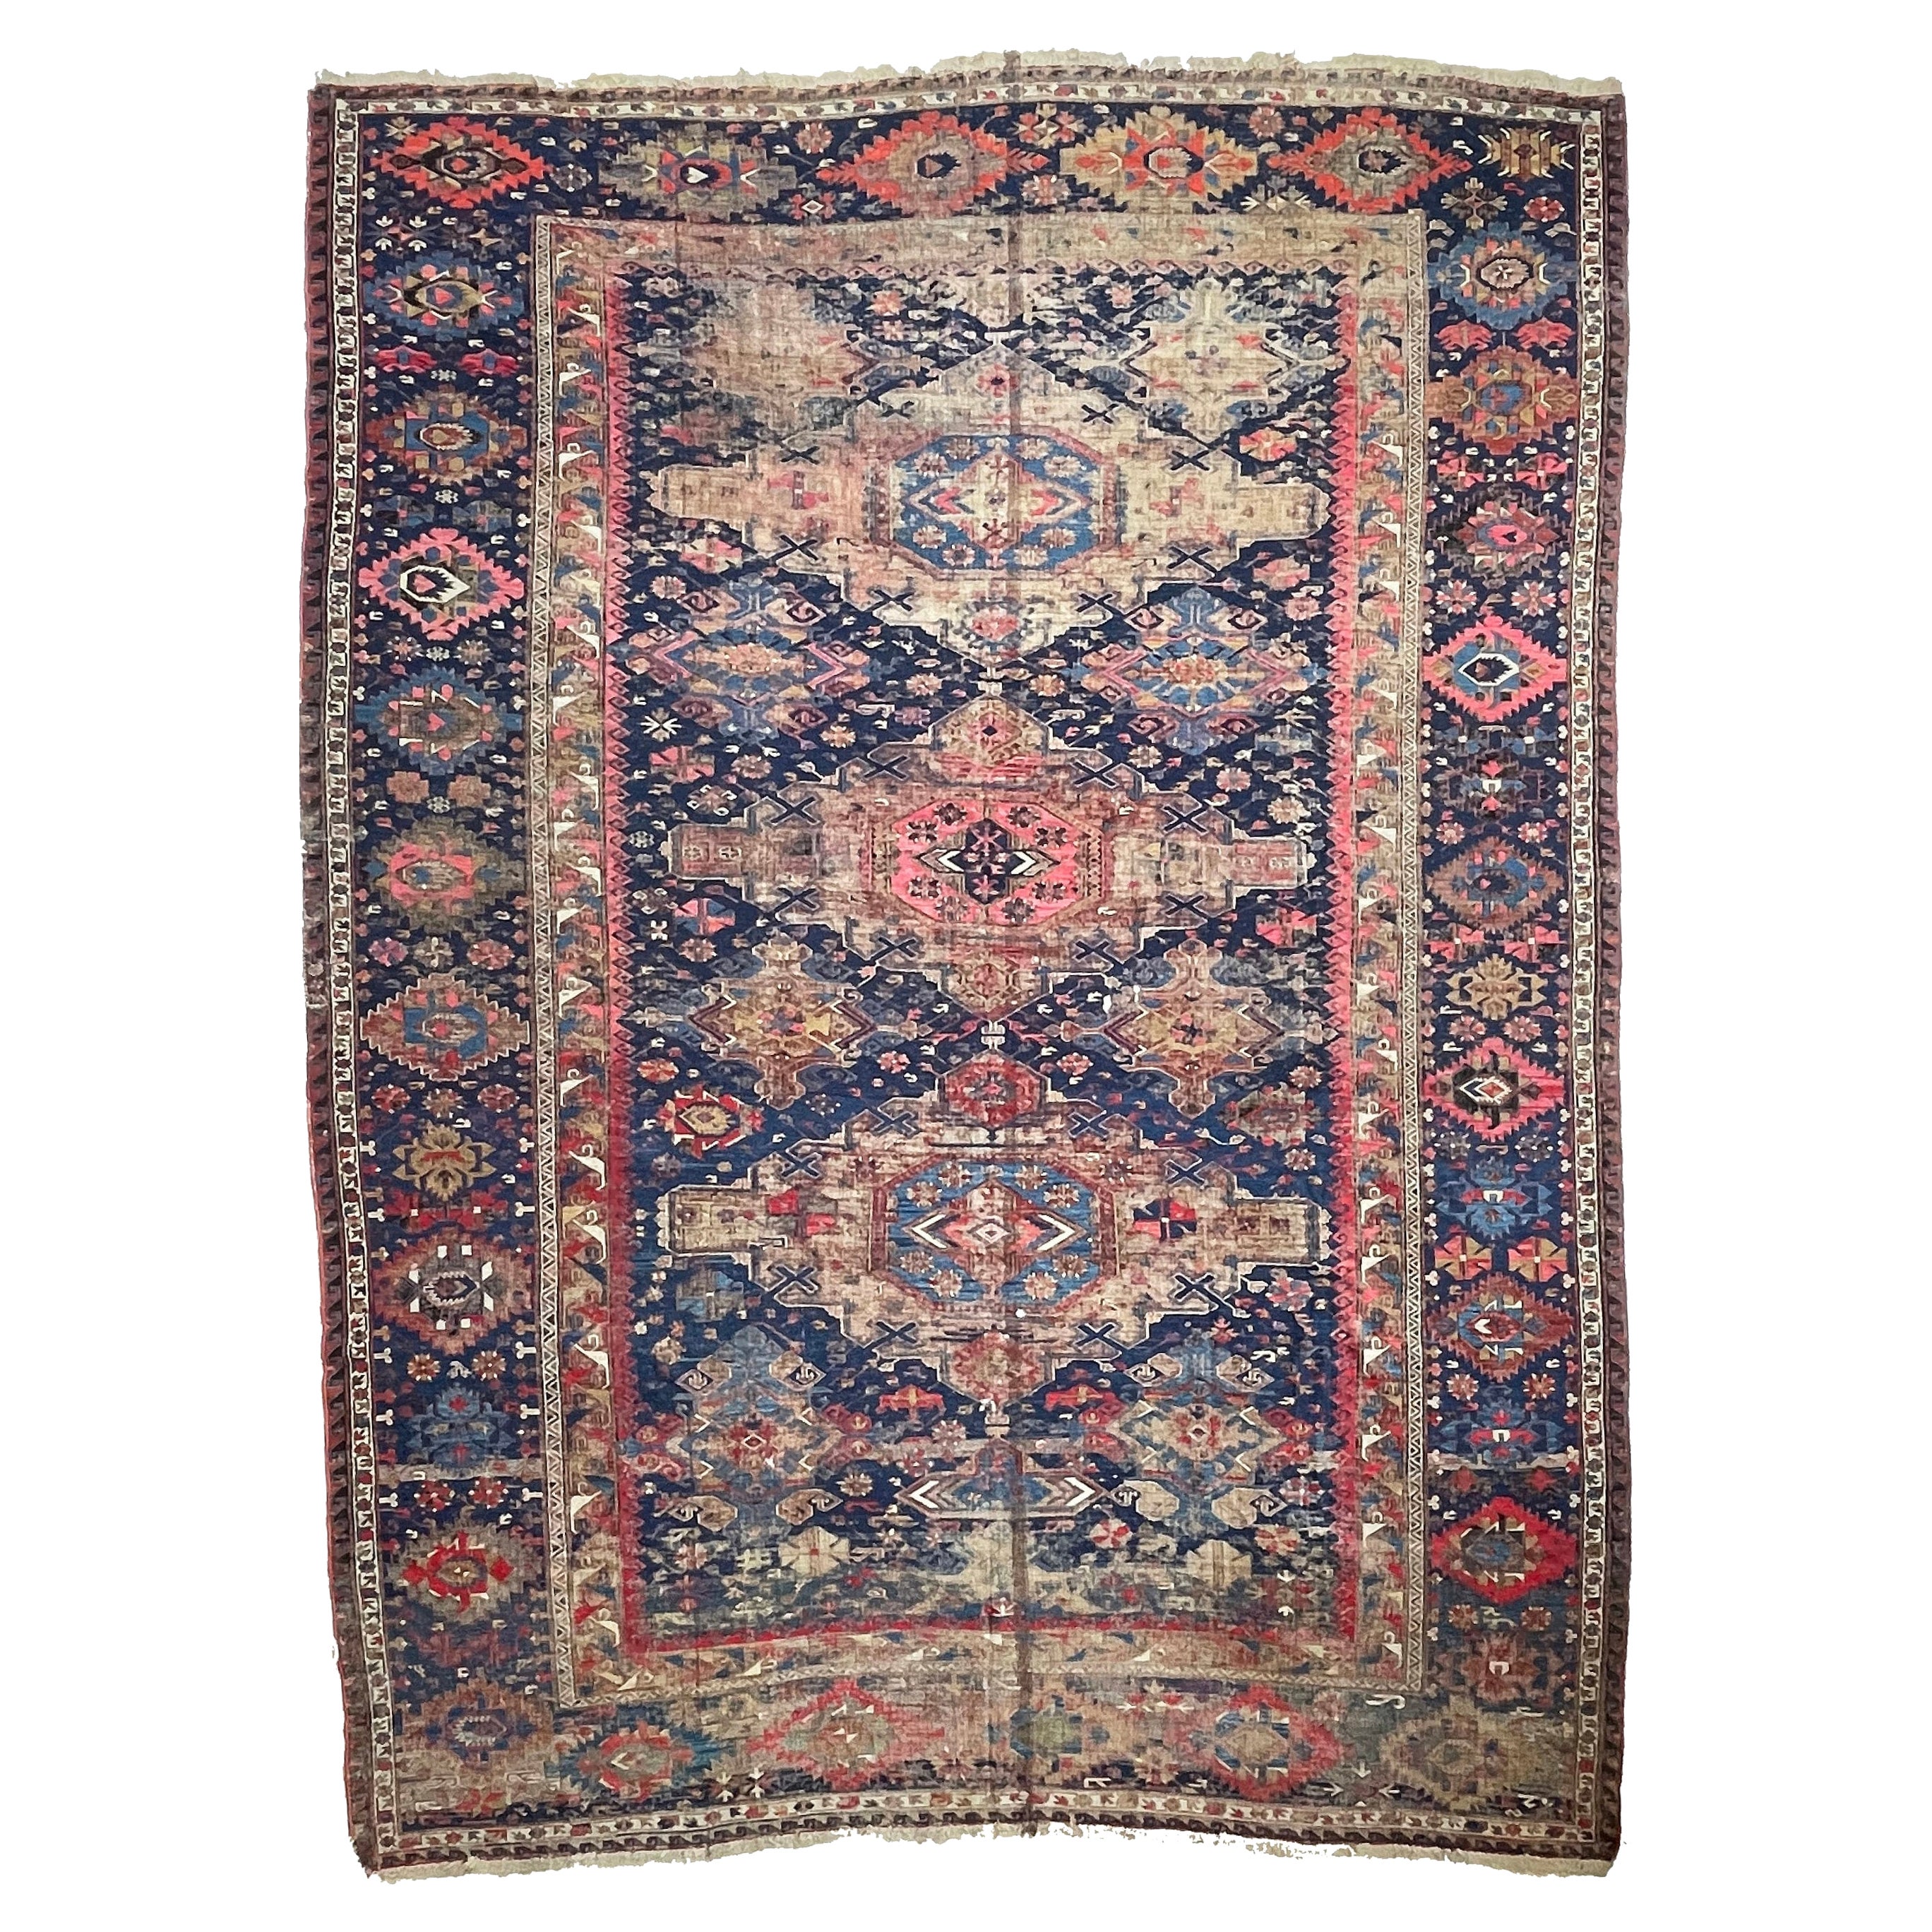 One-of-one Over-sized Palatial Antique Sumac Textile Rug, c.1910